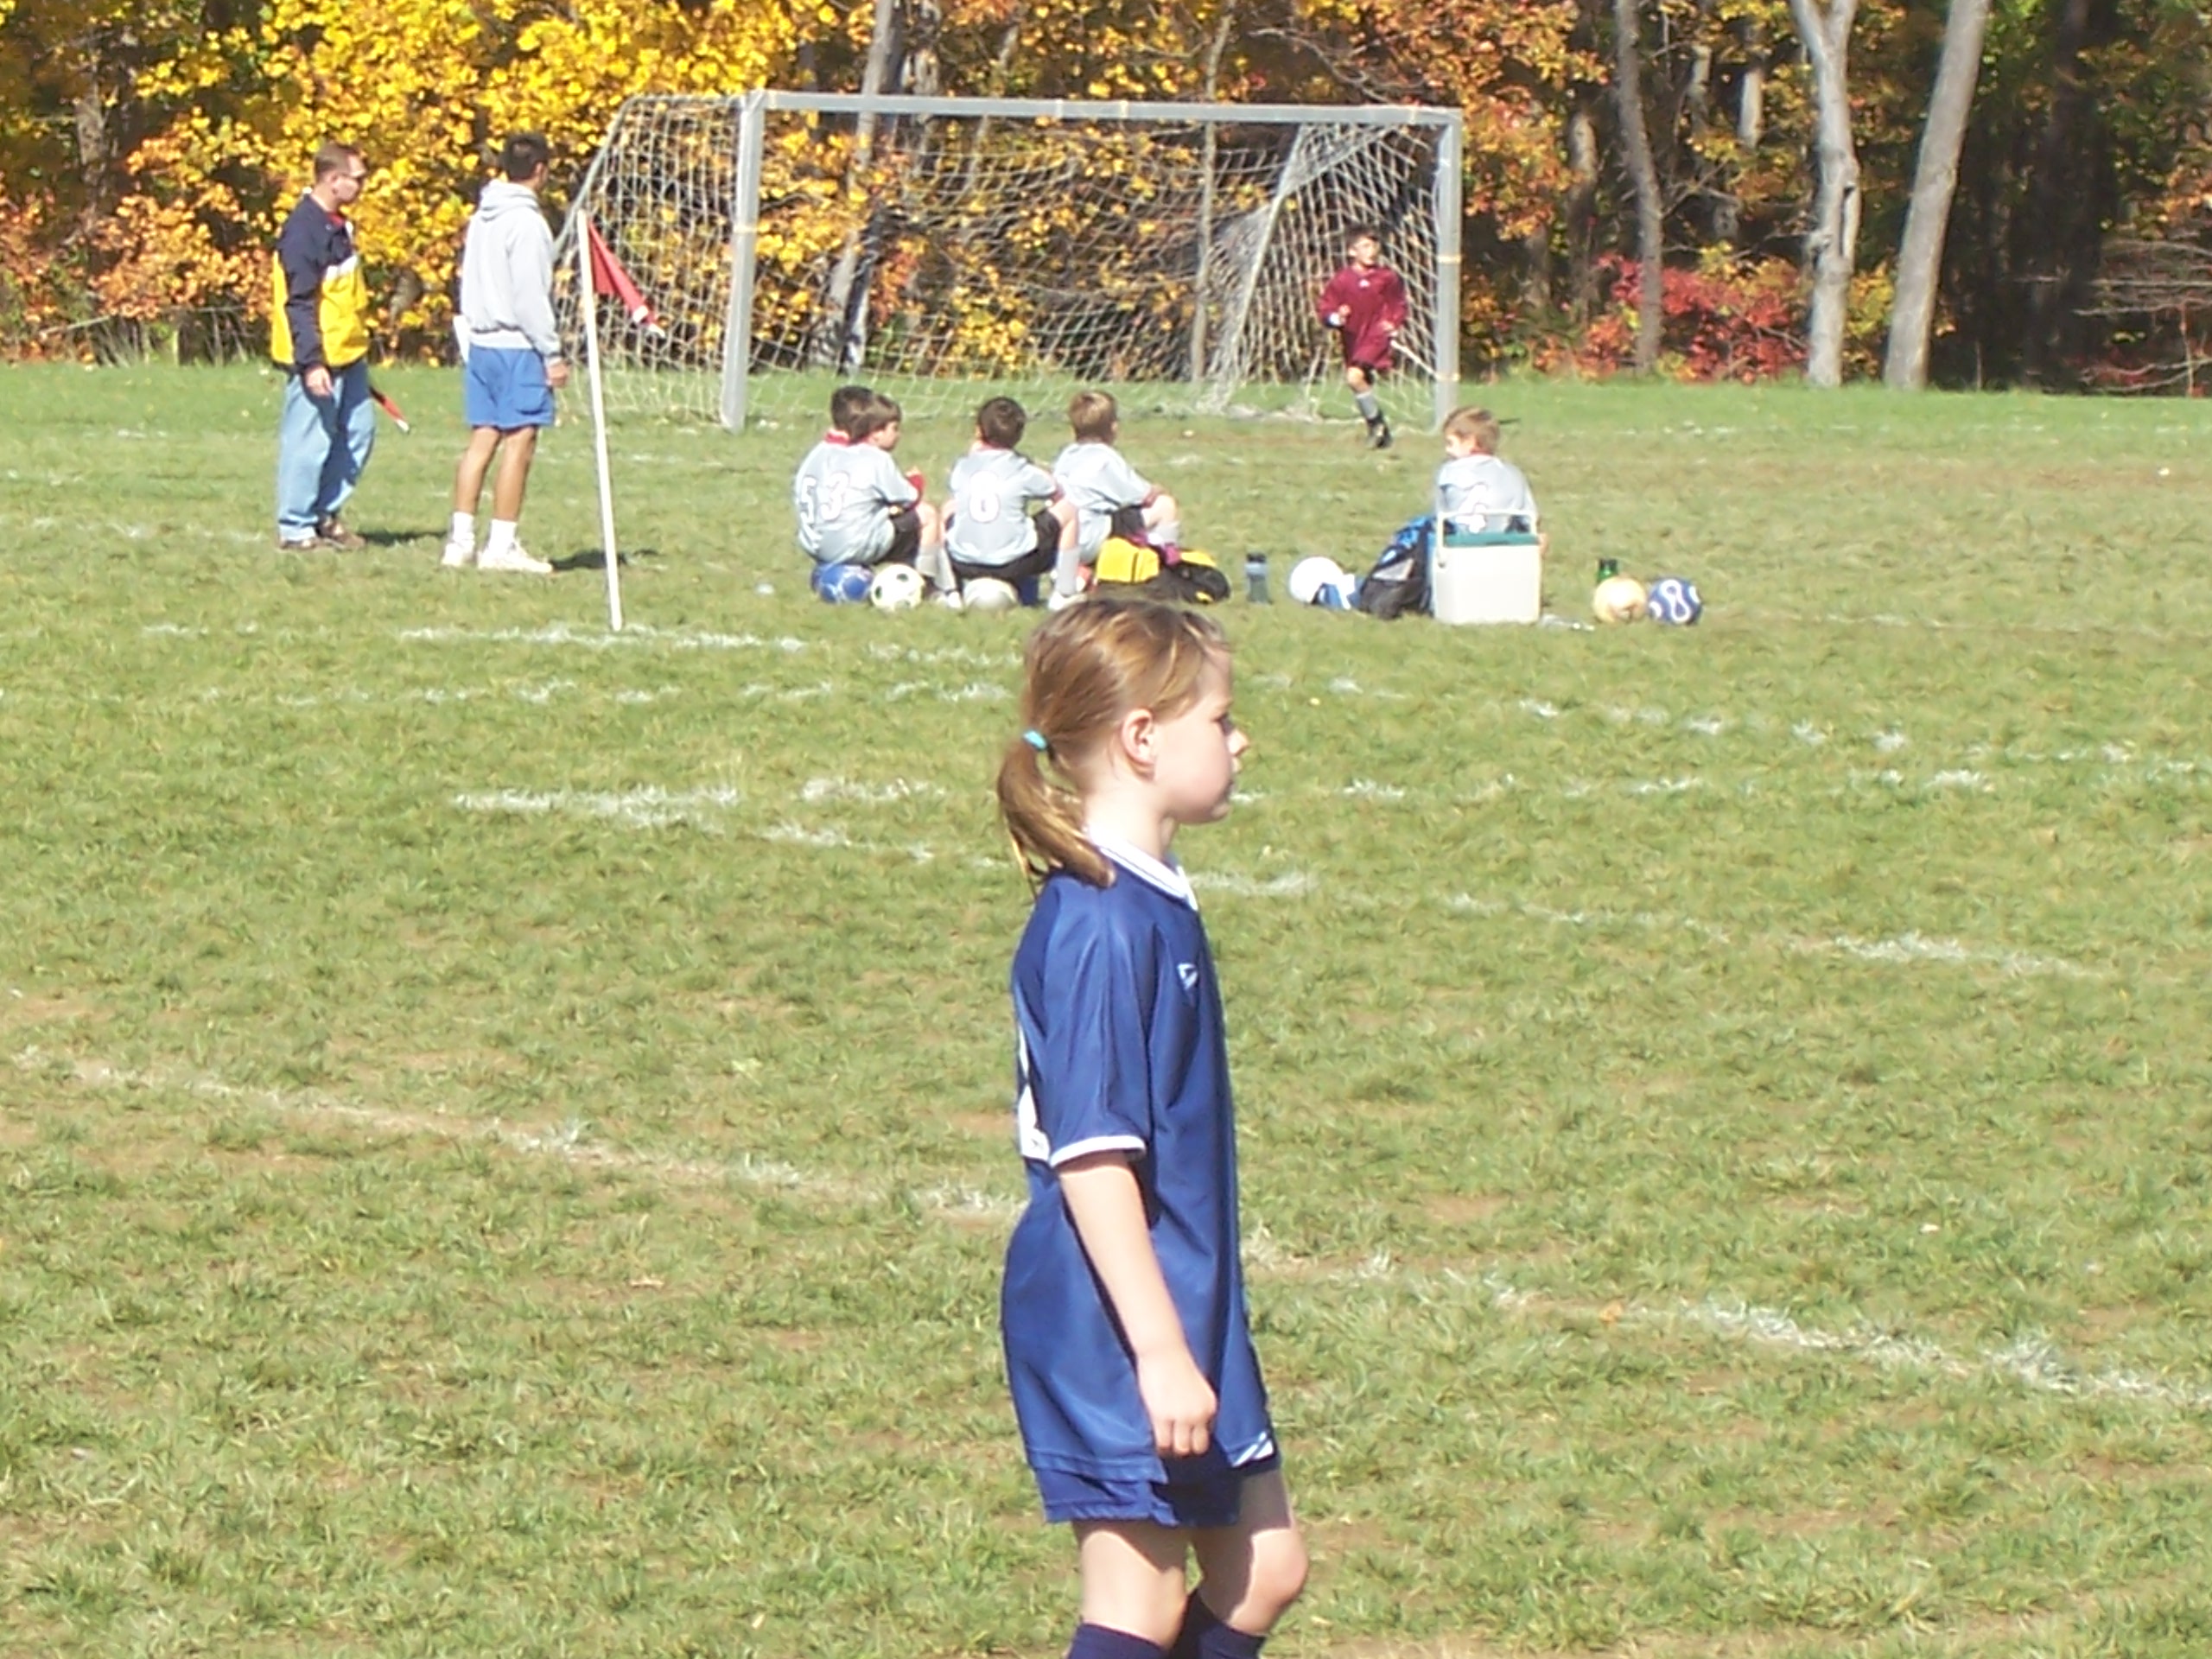 Kid playing a soccer game